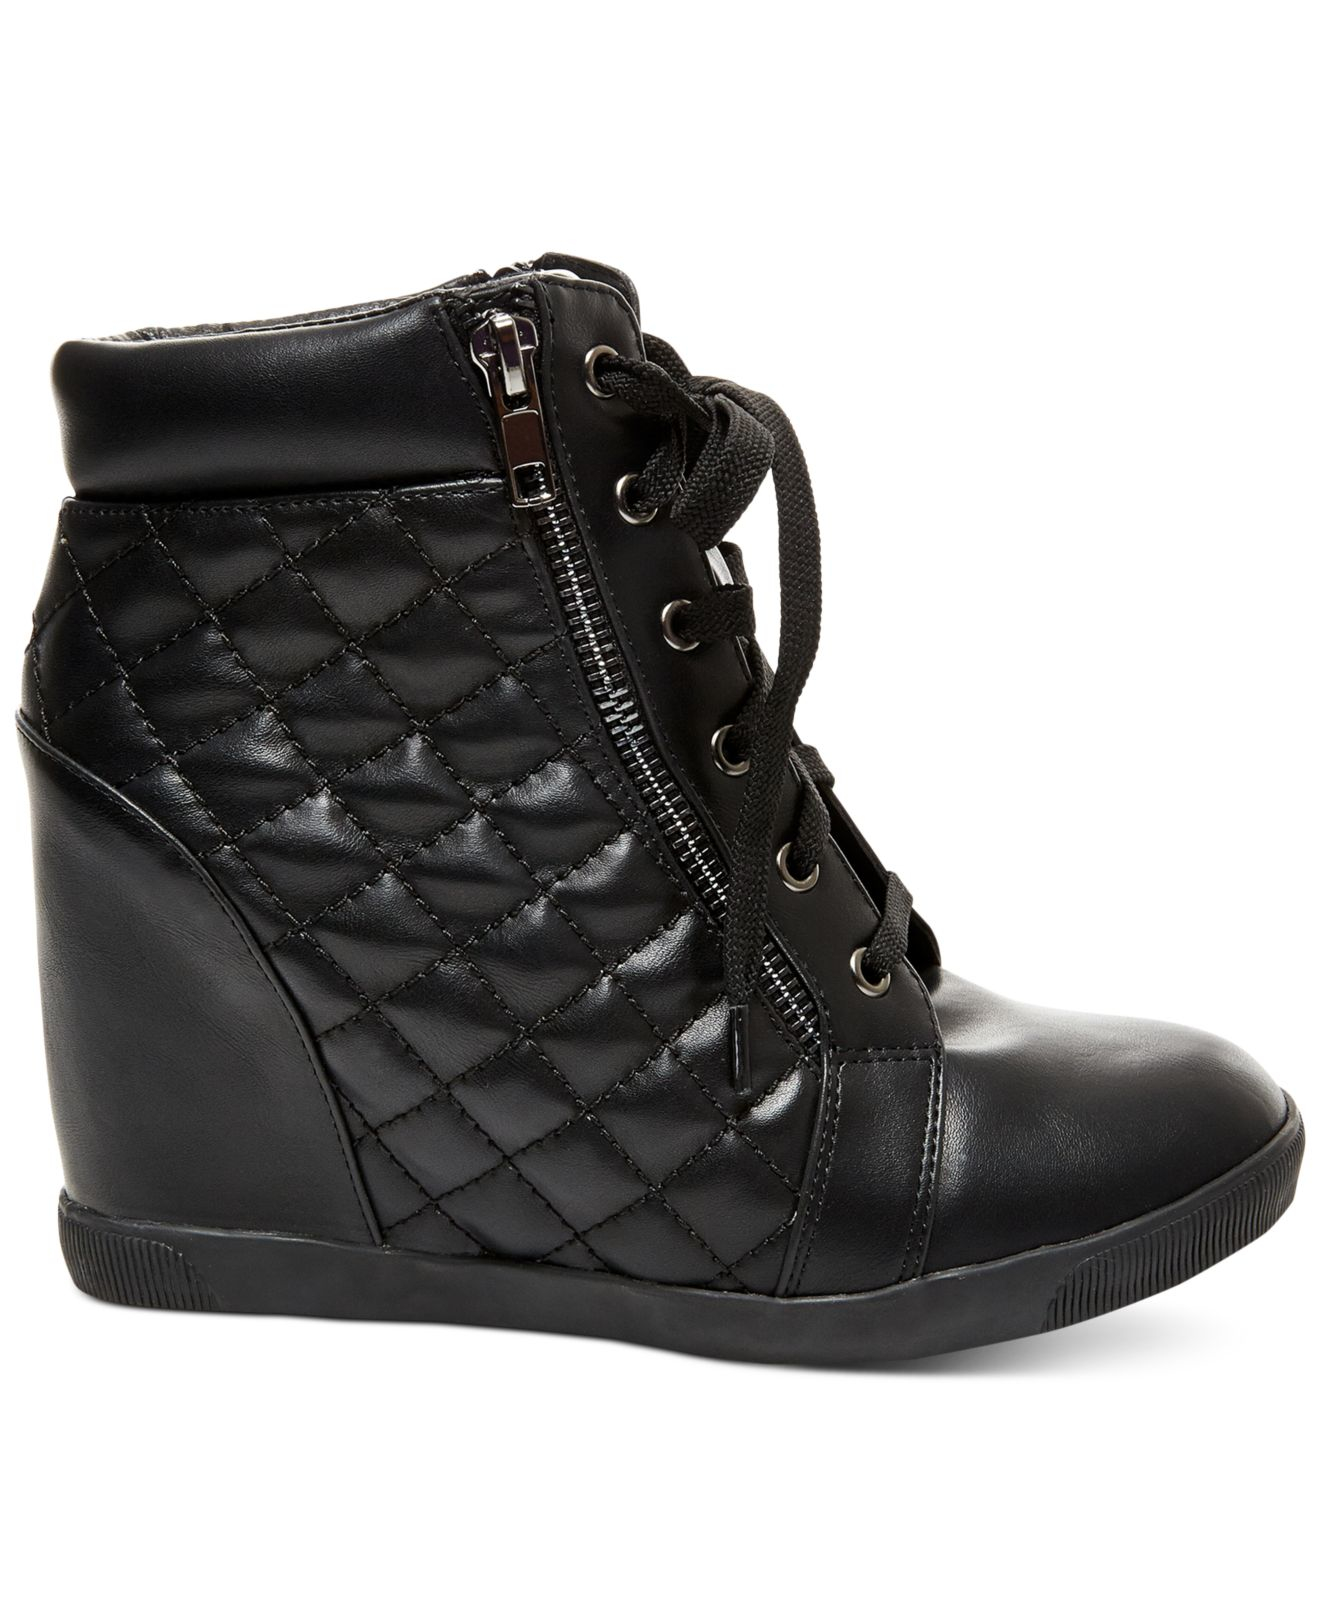 Lyst - Madden Girl Baaxter Quilted High Top Wedge Sneakers in Black